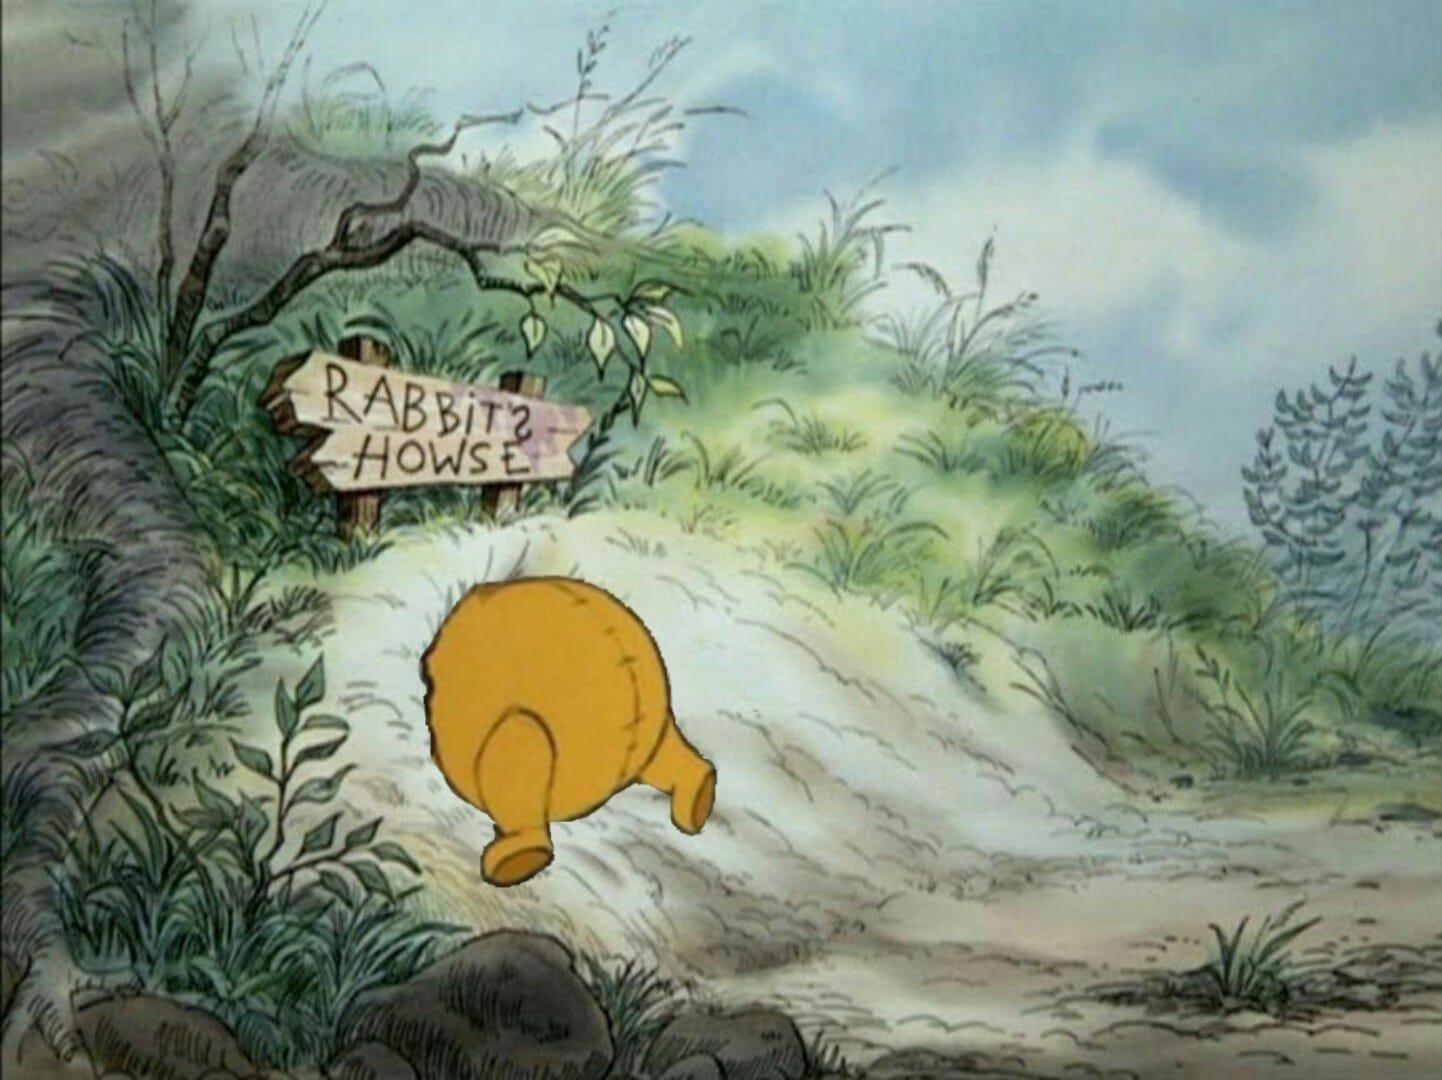 Pooh Bear stuck with his bottom sticking out the entrance to Rabbit's House.